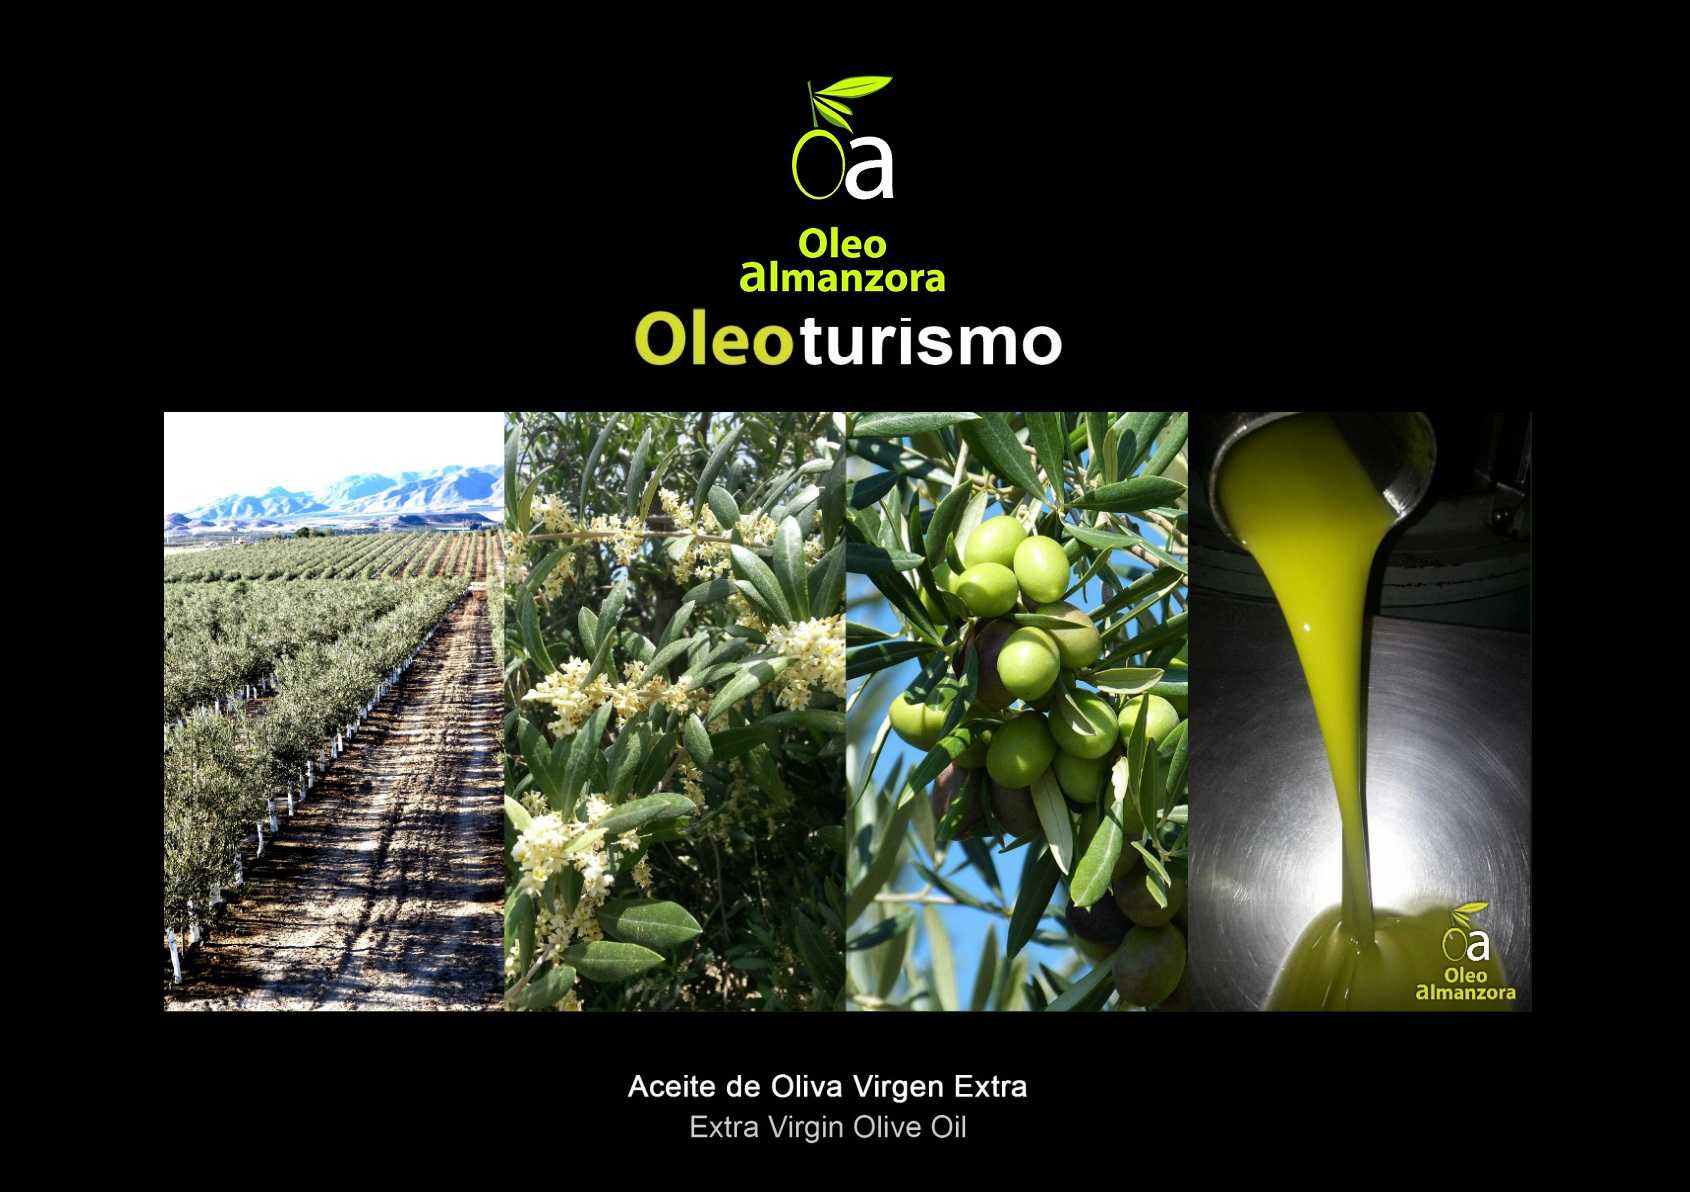 Oleoturismo in Pulpí by OleoAlmanzora: Guided tour with an Extra Virgin Olive Oil breakfast / afternoon tea